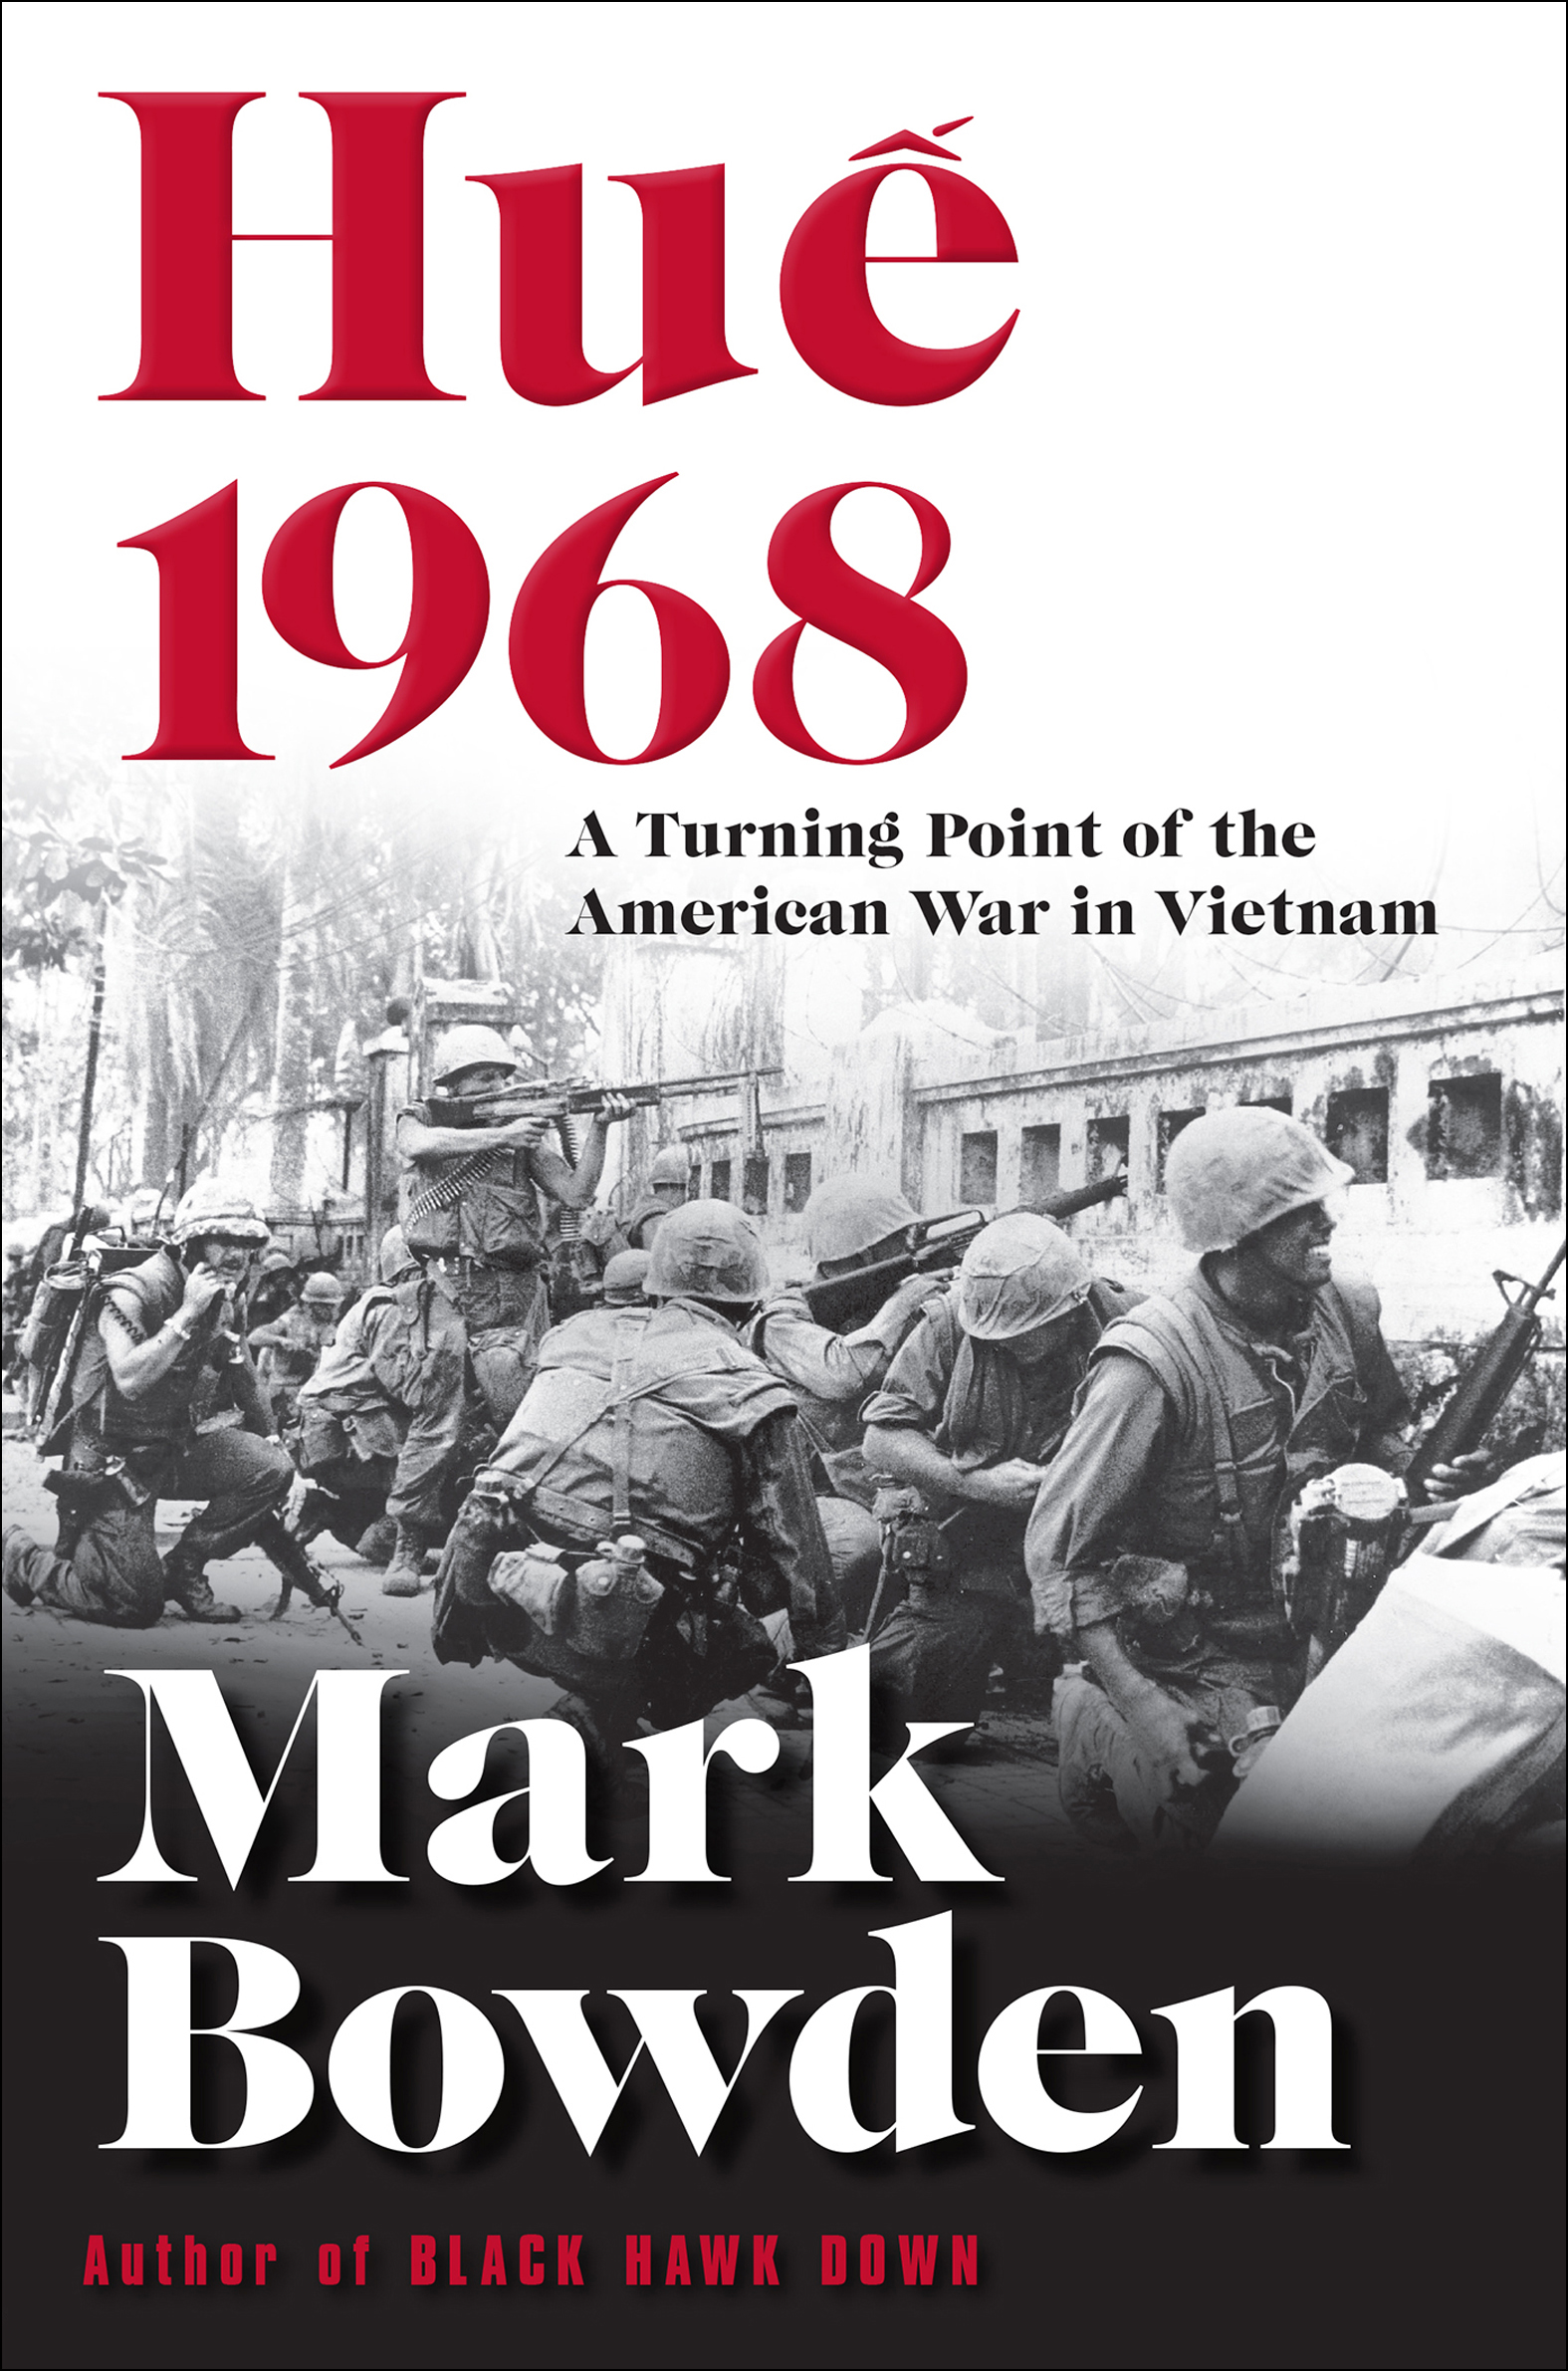 Cover image for Hue 1968 [electronic resource] : A Turning Point of the American War in Vietnam